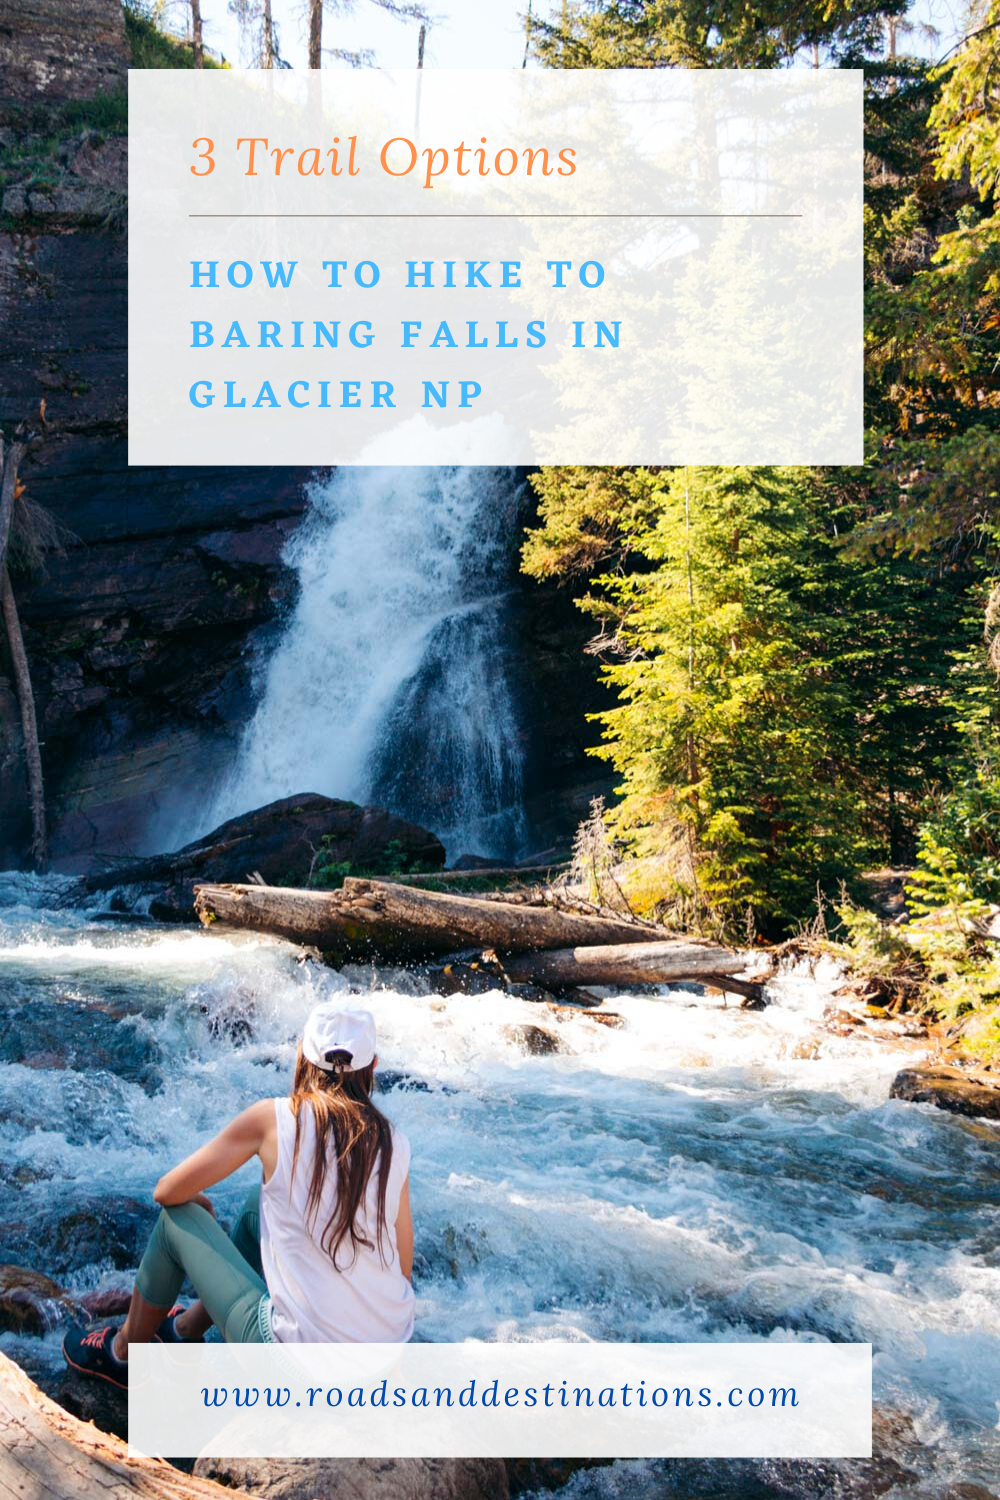 Hike to Baring Falls - Roads and Destinations